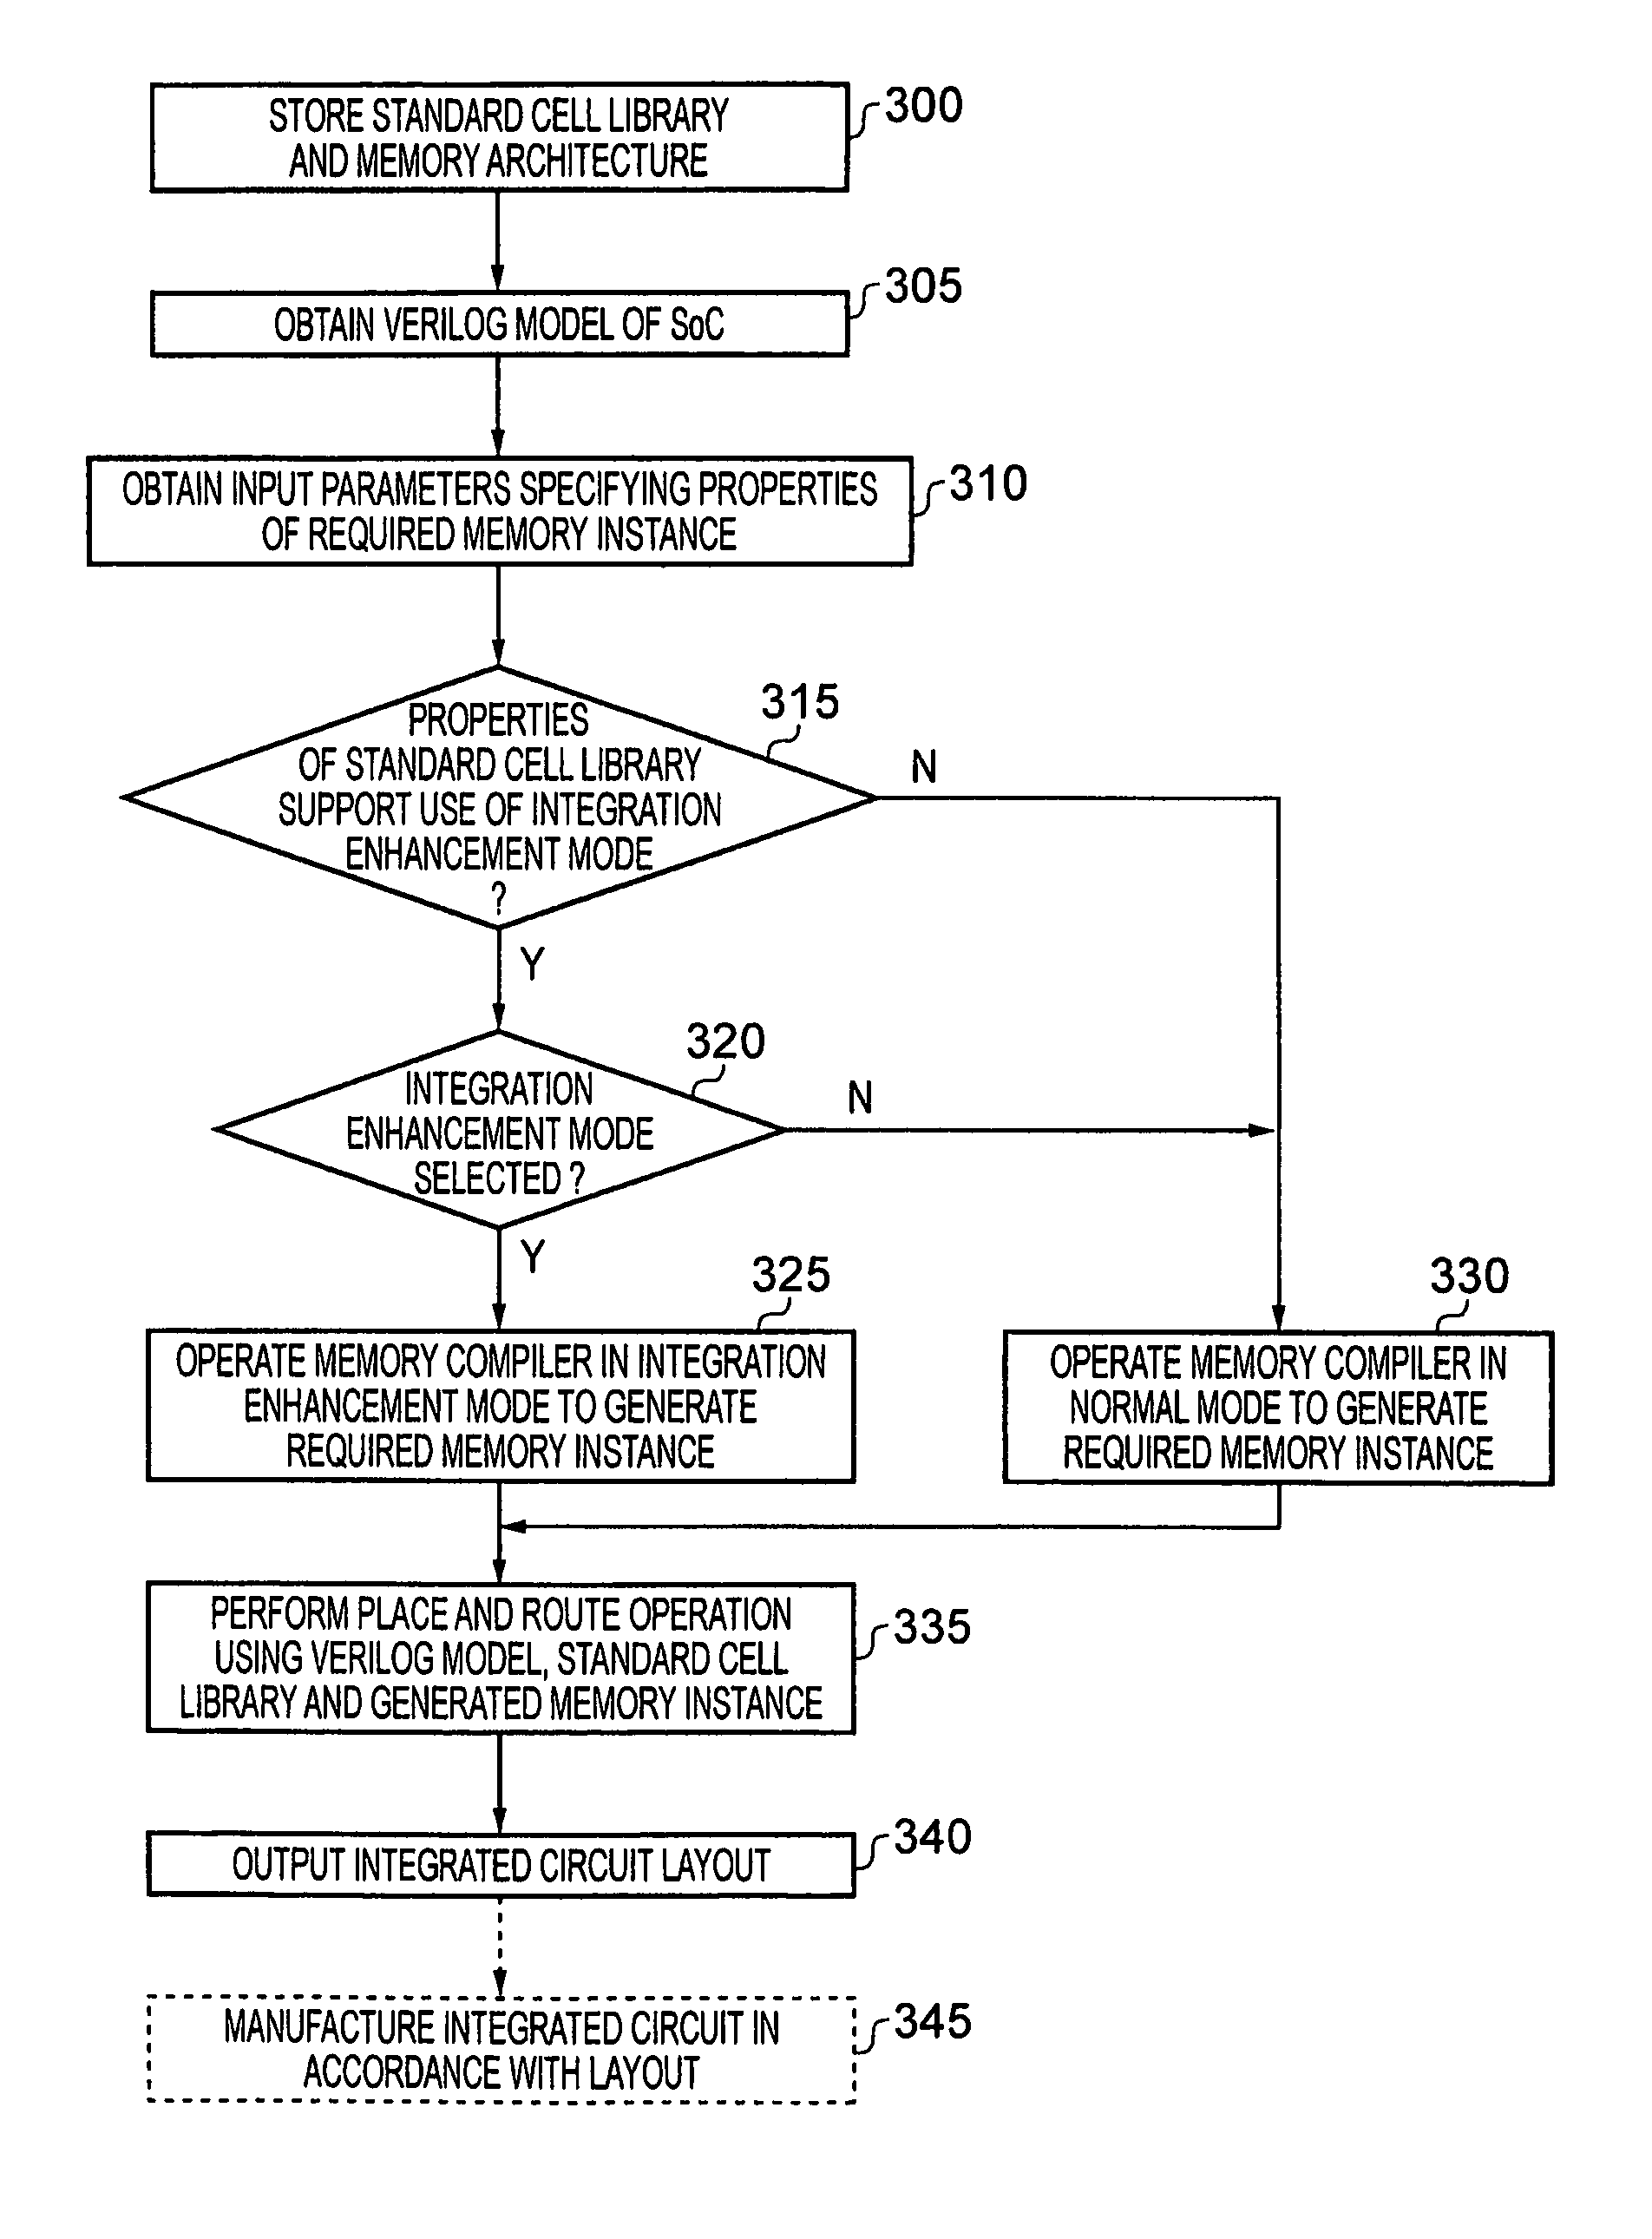 Method of generating a layout of an integrated circuit comprising both standard cells and at least one memory instance